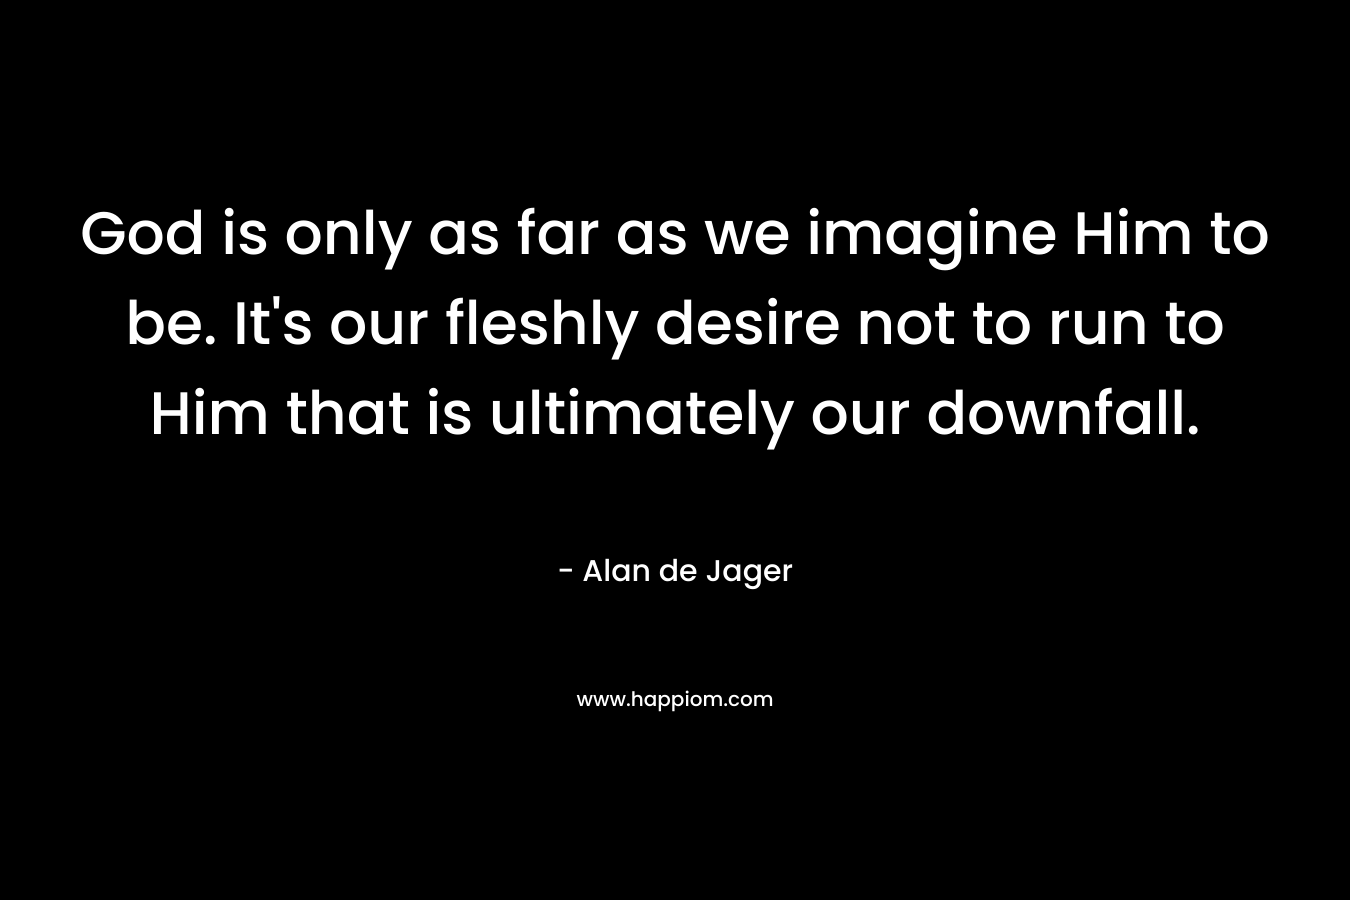 God is only as far as we imagine Him to be. It's our fleshly desire not to run to Him that is ultimately our downfall.